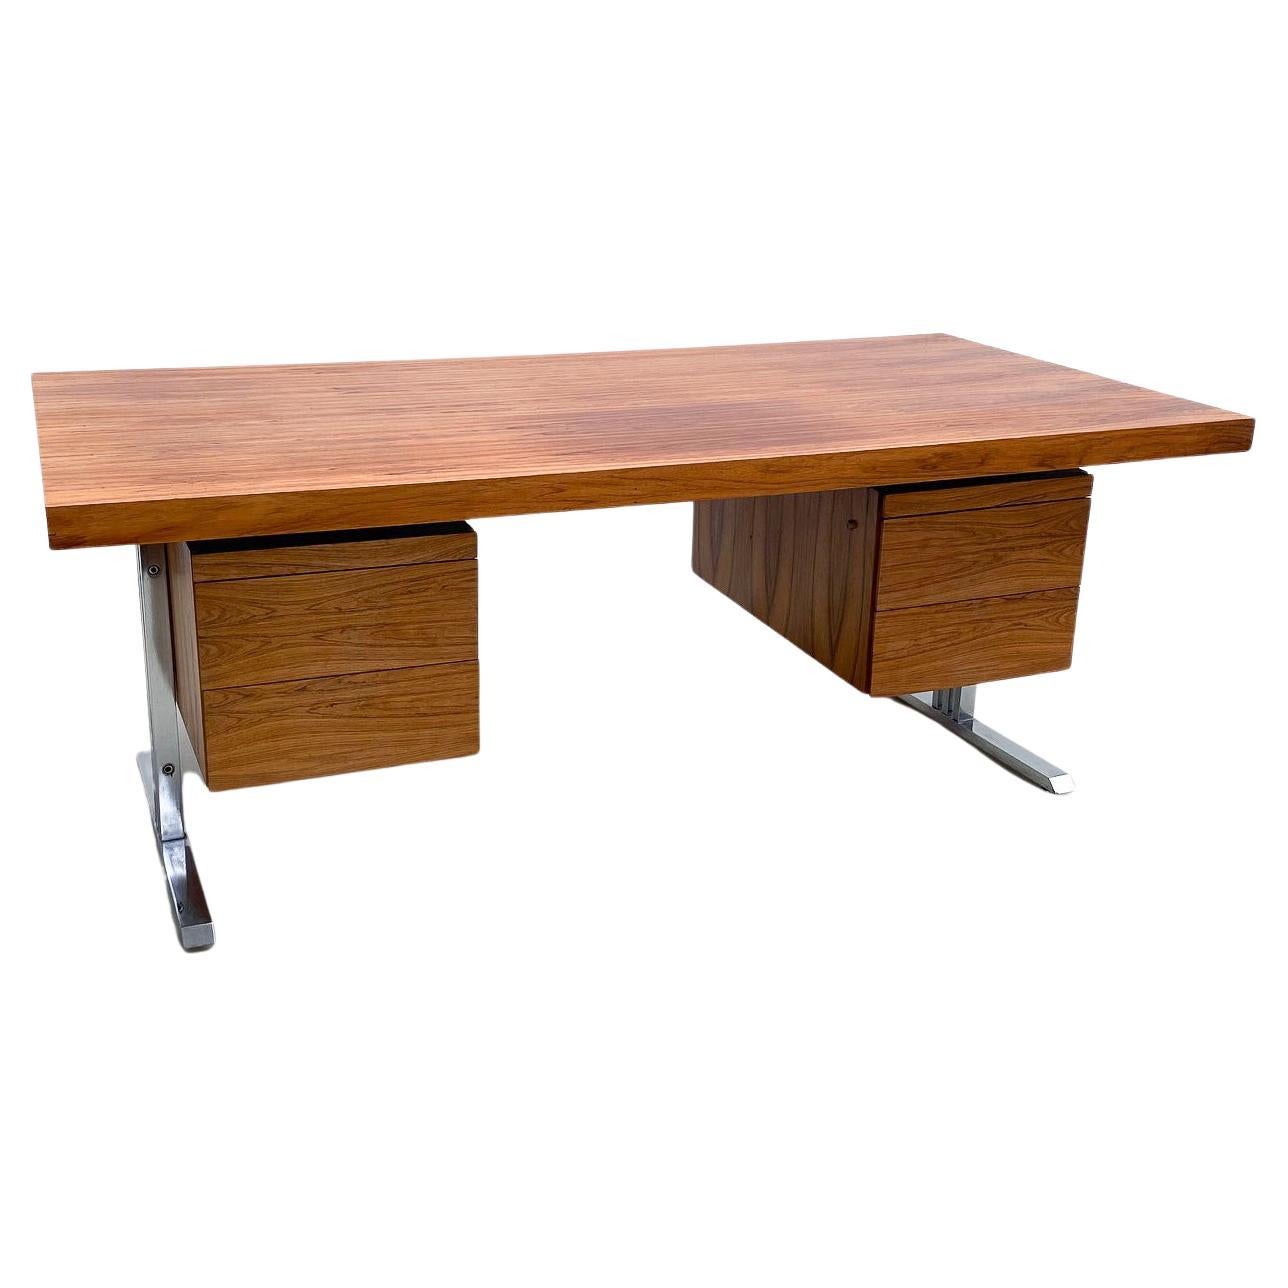 Mid-Century Modern Italian Desk with Drawers , Wood and Chrome, 1970s For Sale